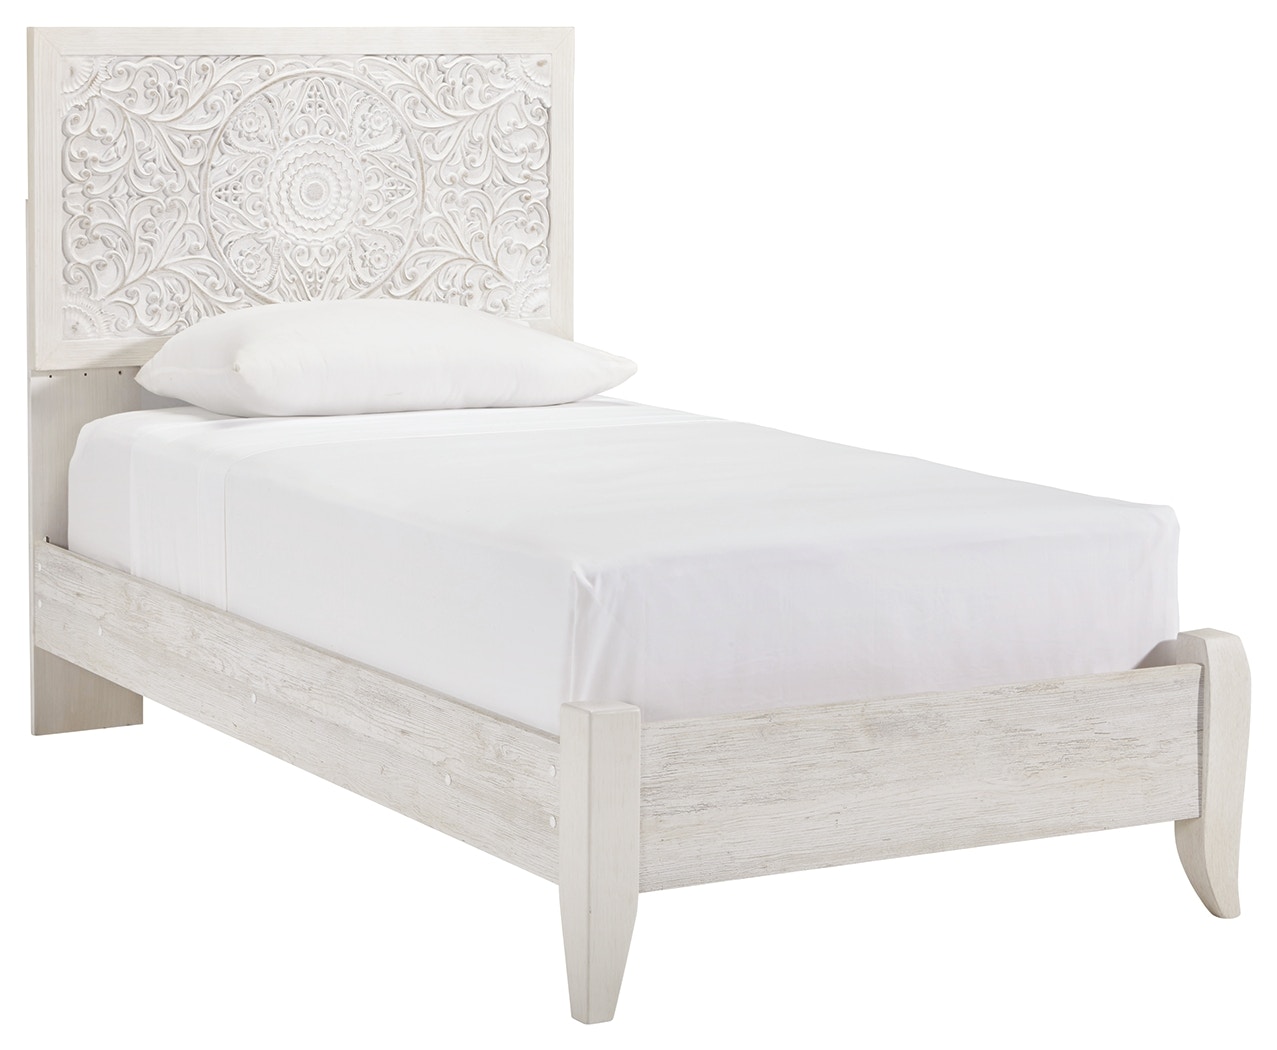 Signature Design by Ashley Bedroom Paxberry Twin Panel Bed B181B1 